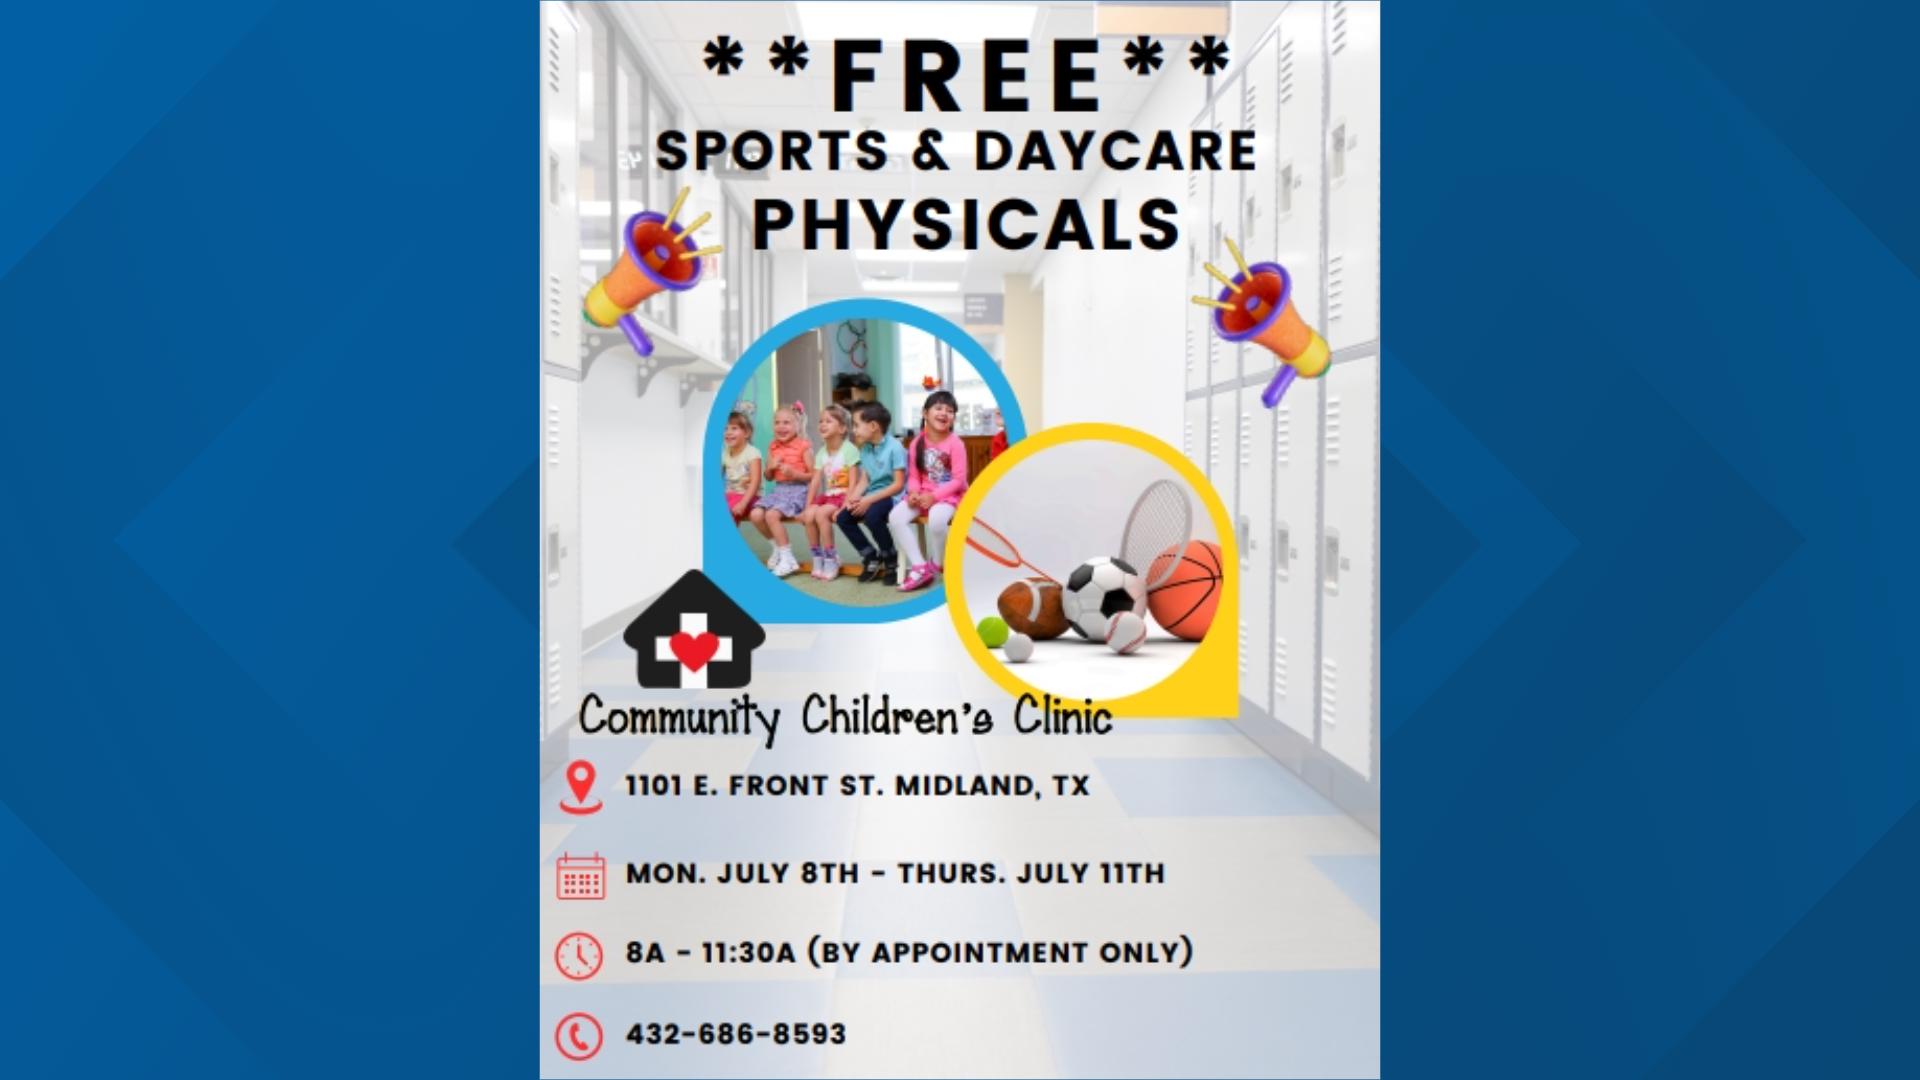 The physicals will be given from July 8 to July 11 from 8 a.m. to 11:30 a.m., by appointment only. To schedule one, call 432-686-8593.